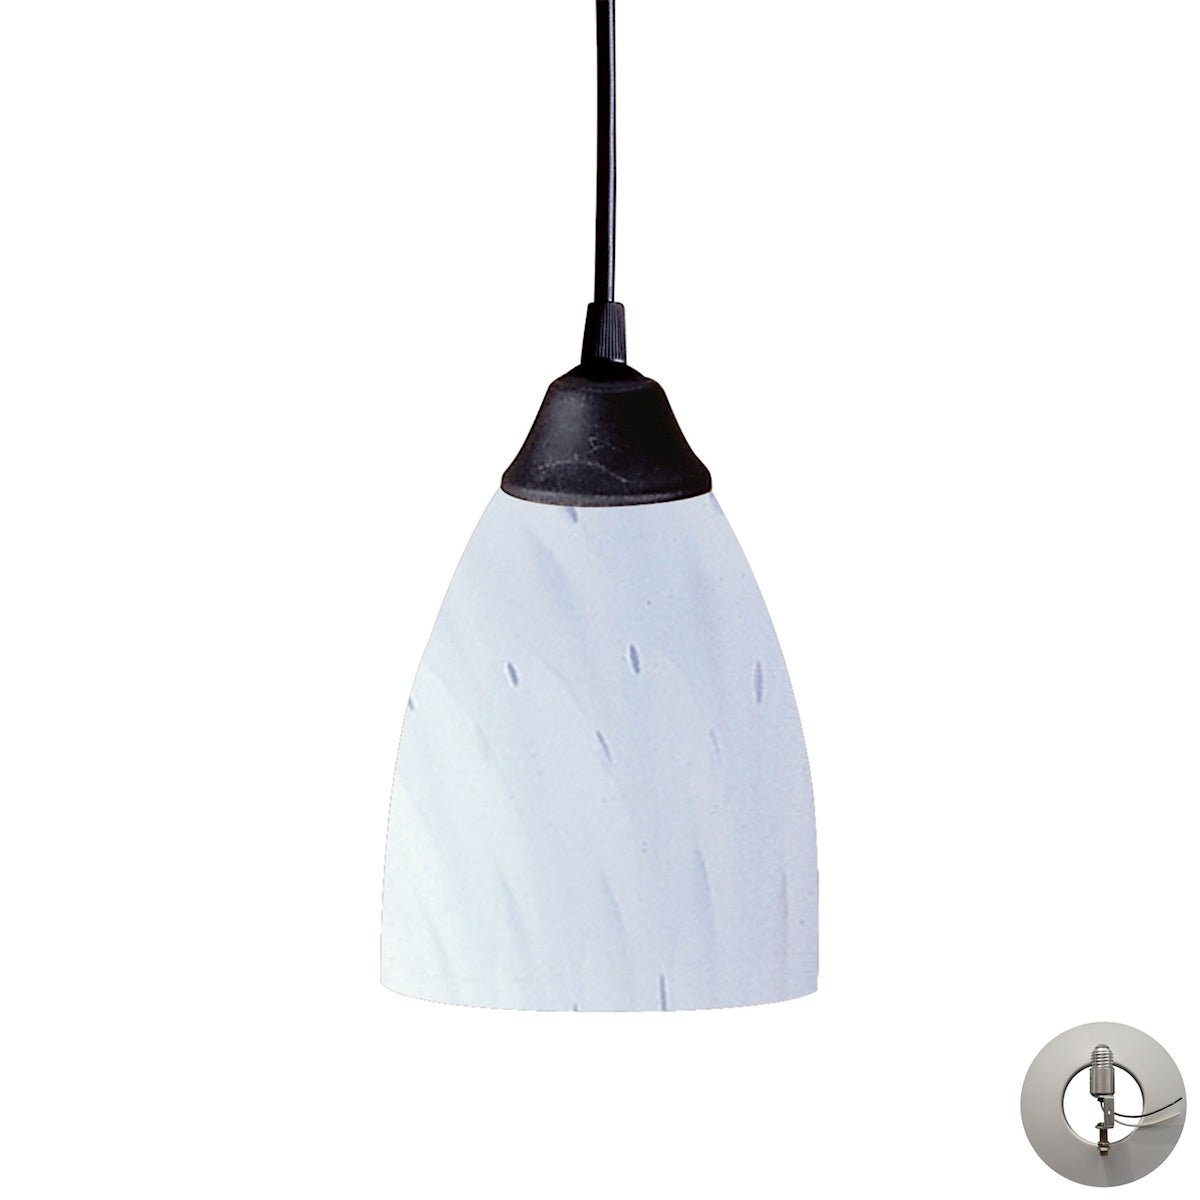 Classico 1-Light Mini Pendant in Dark Rust with Simple White Glass - Includes Adapter Kit